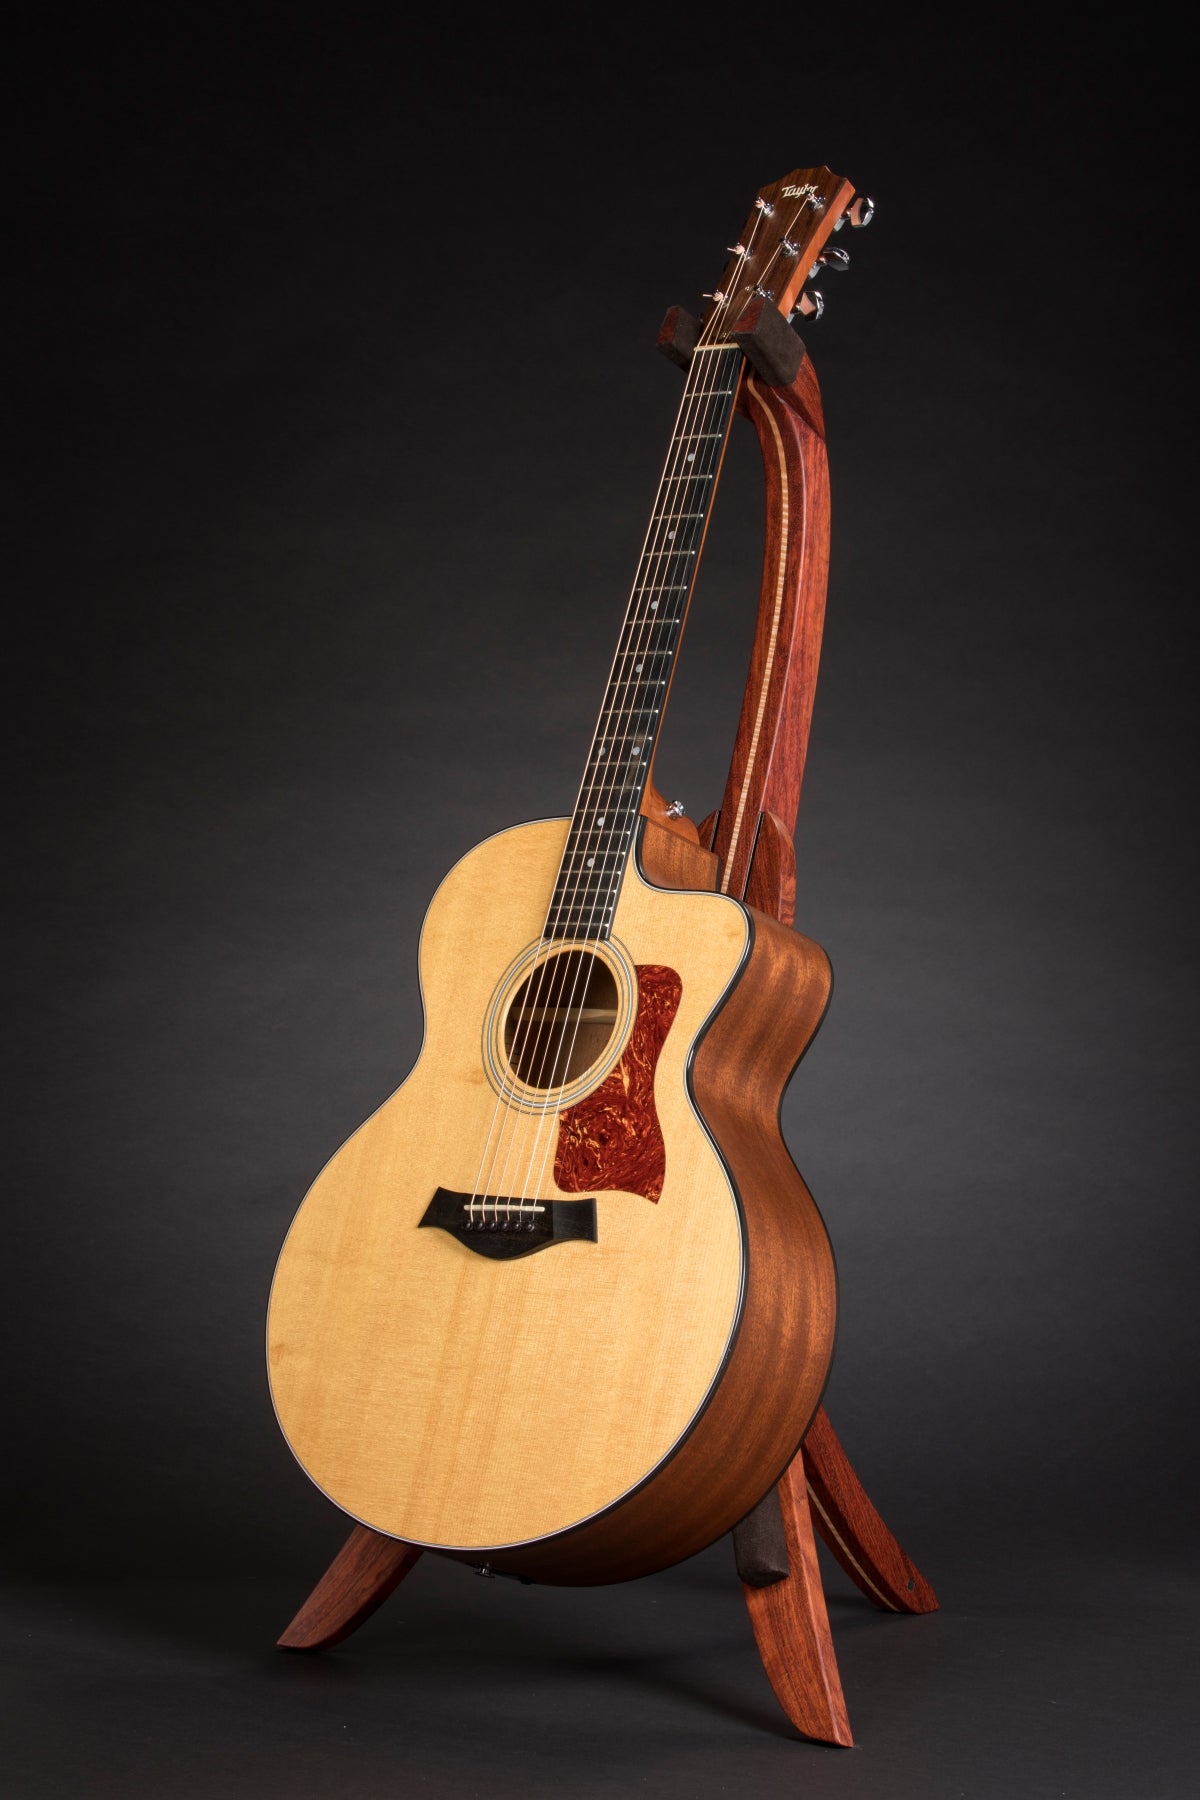 Folding bubinga rosewood and curly maple wood guitar floor stand full front image with Taylor guitar